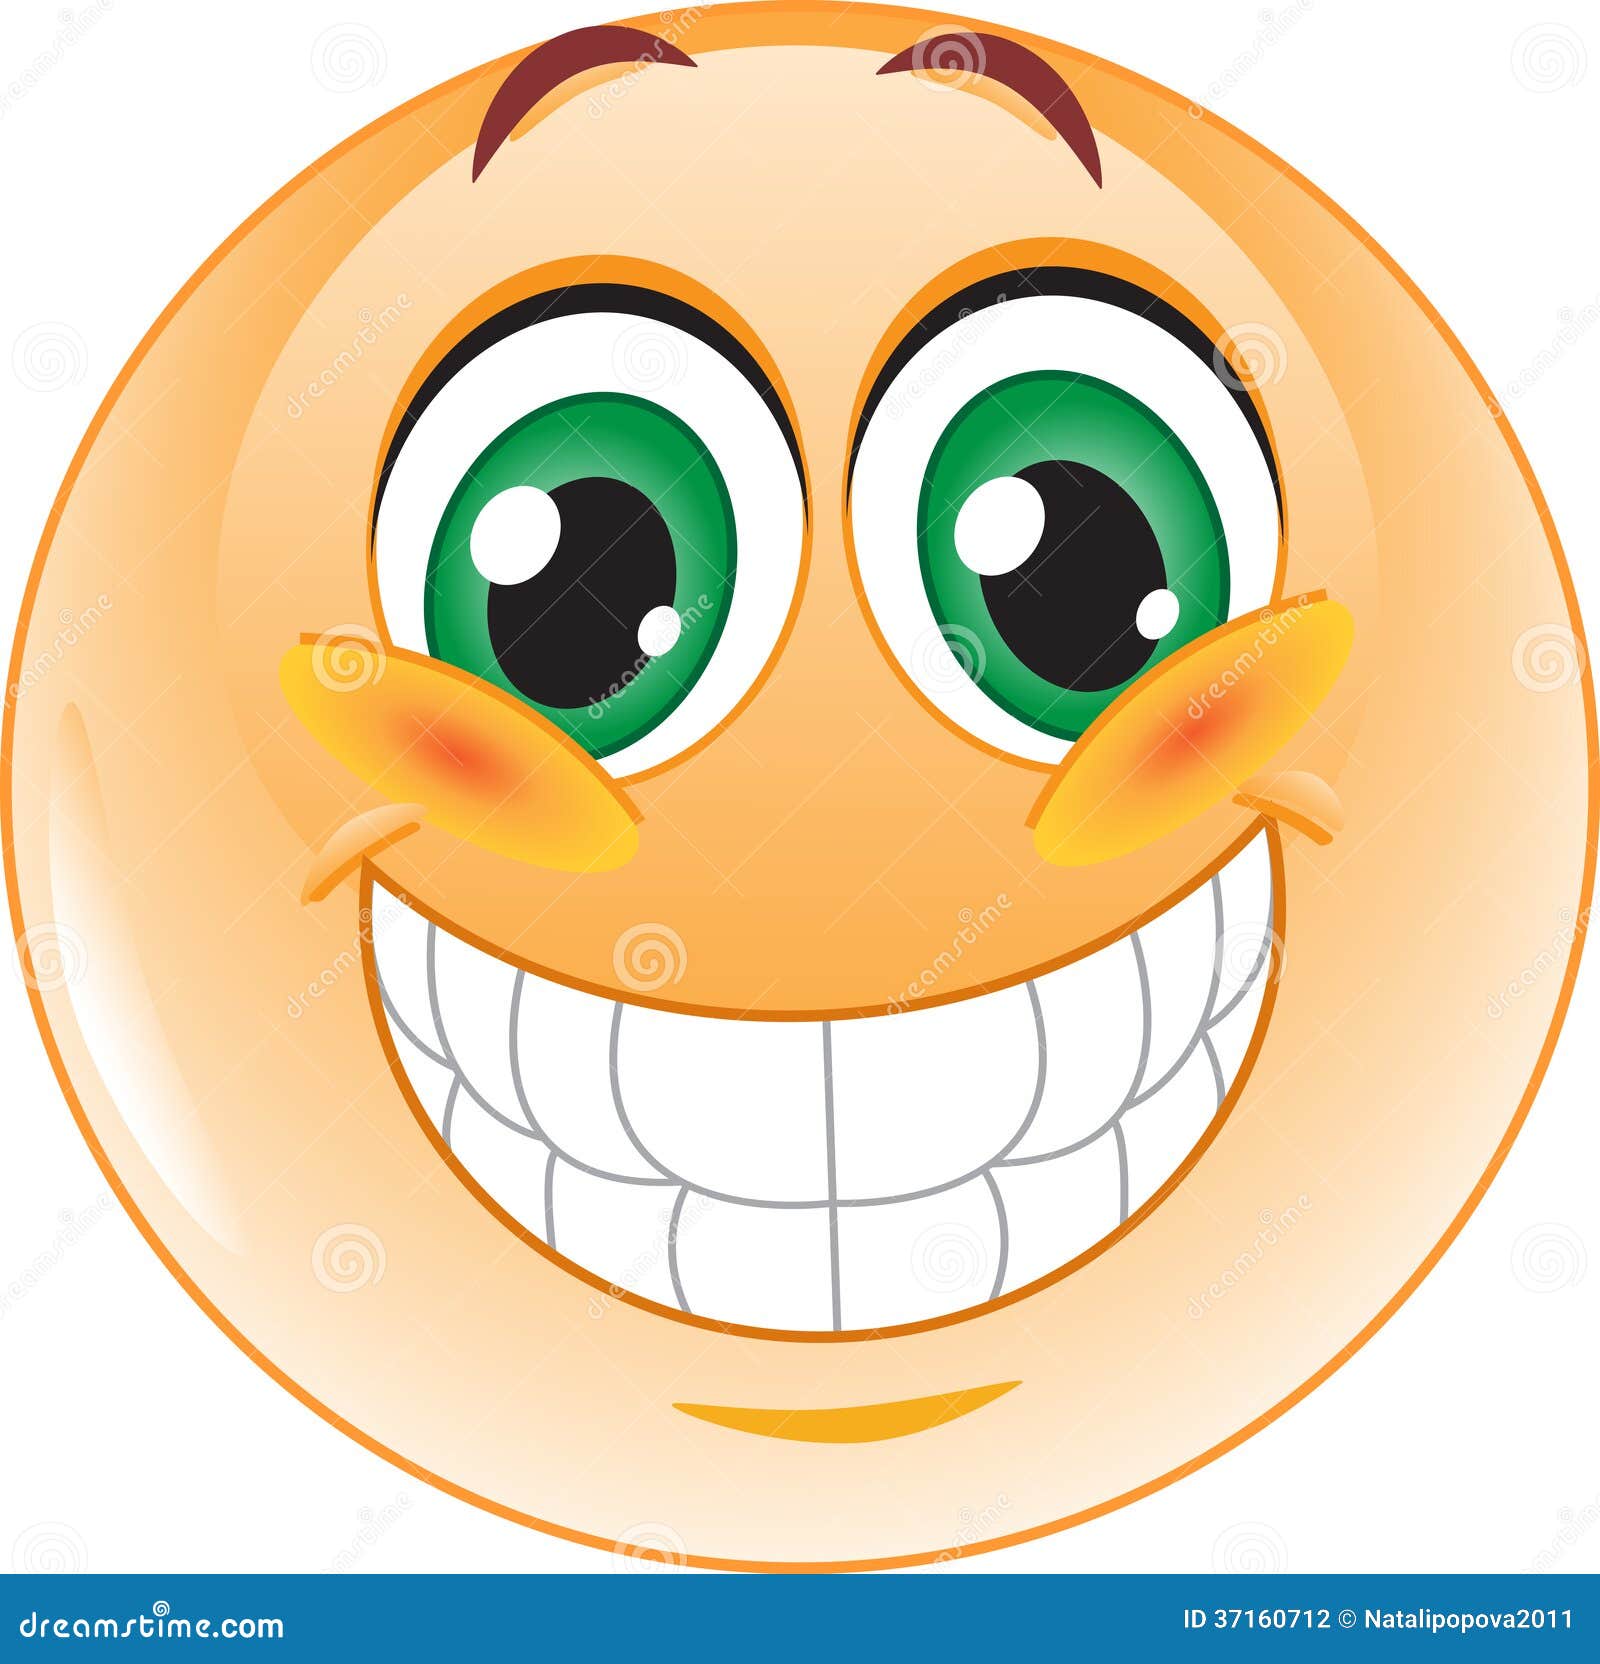 Big smile stock vector. Illustration of funny -